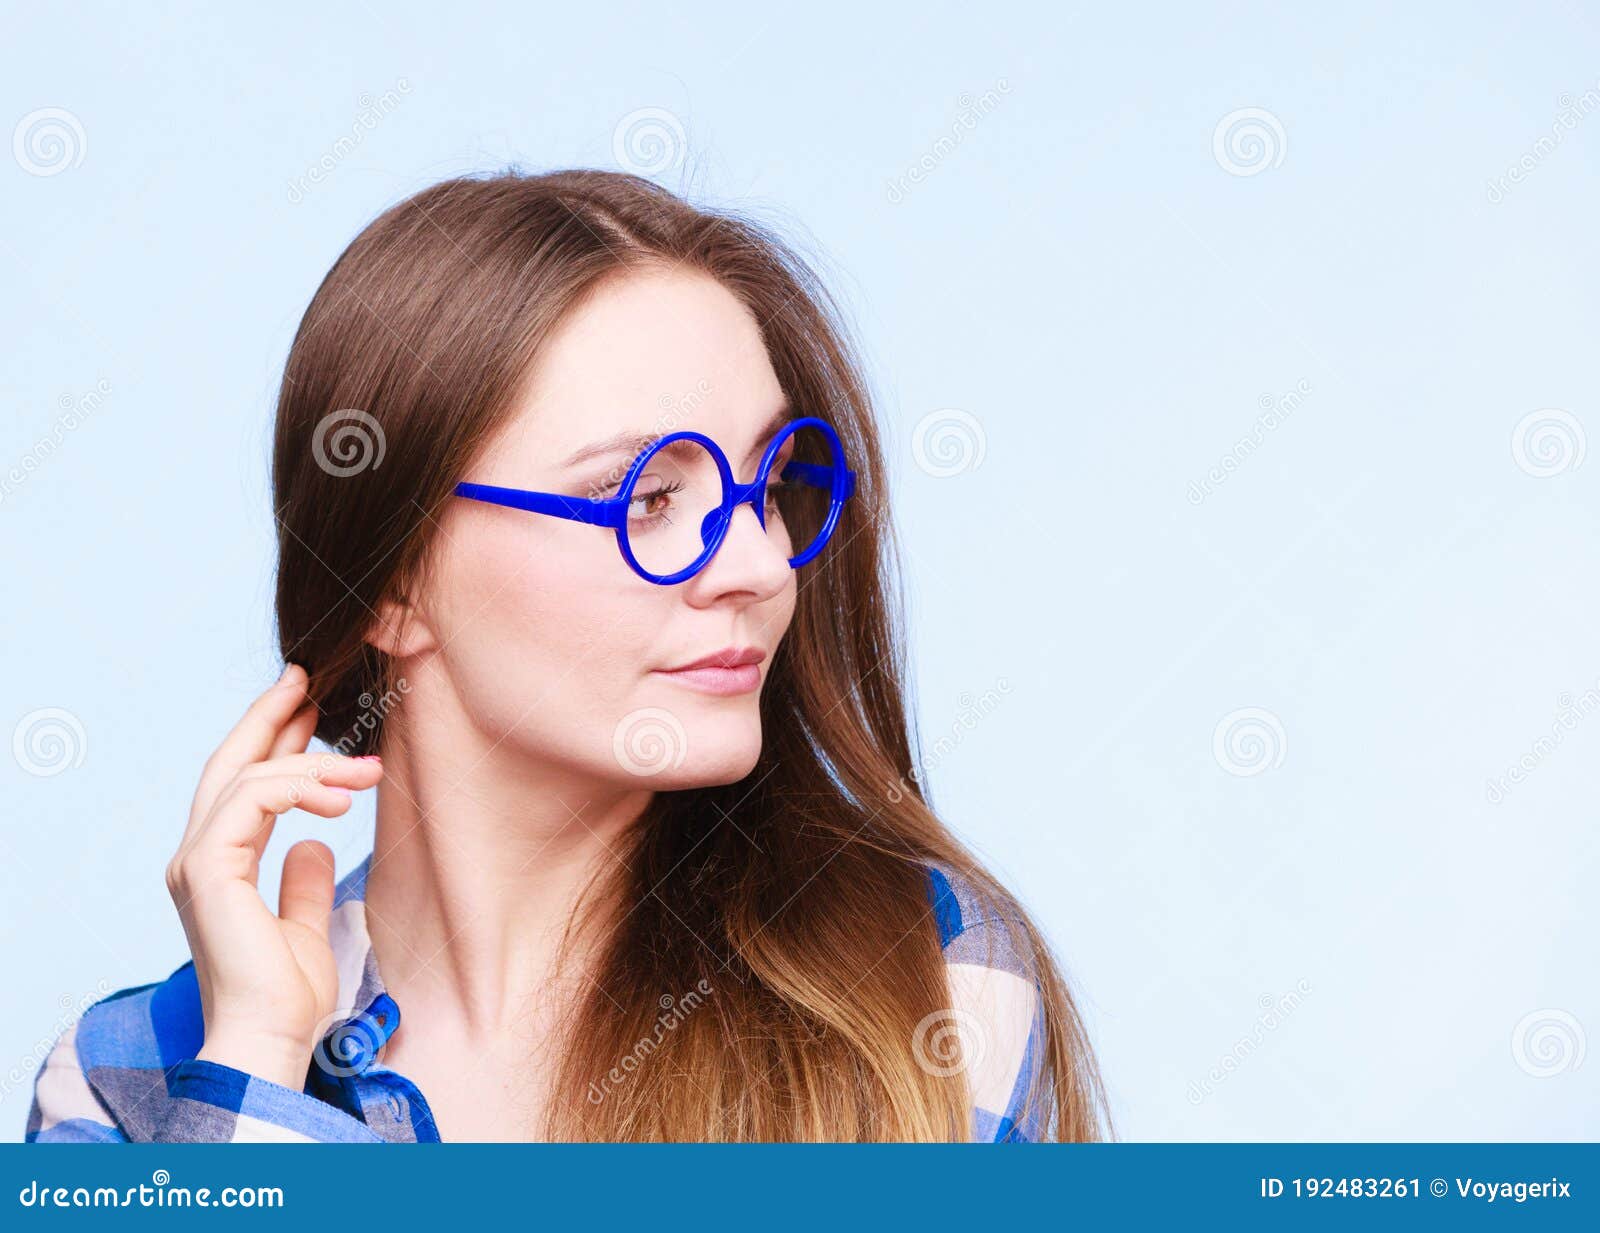 Attractive Nerdy Woman In Weird Glasses Stock Image Image Of Education School 192483261 